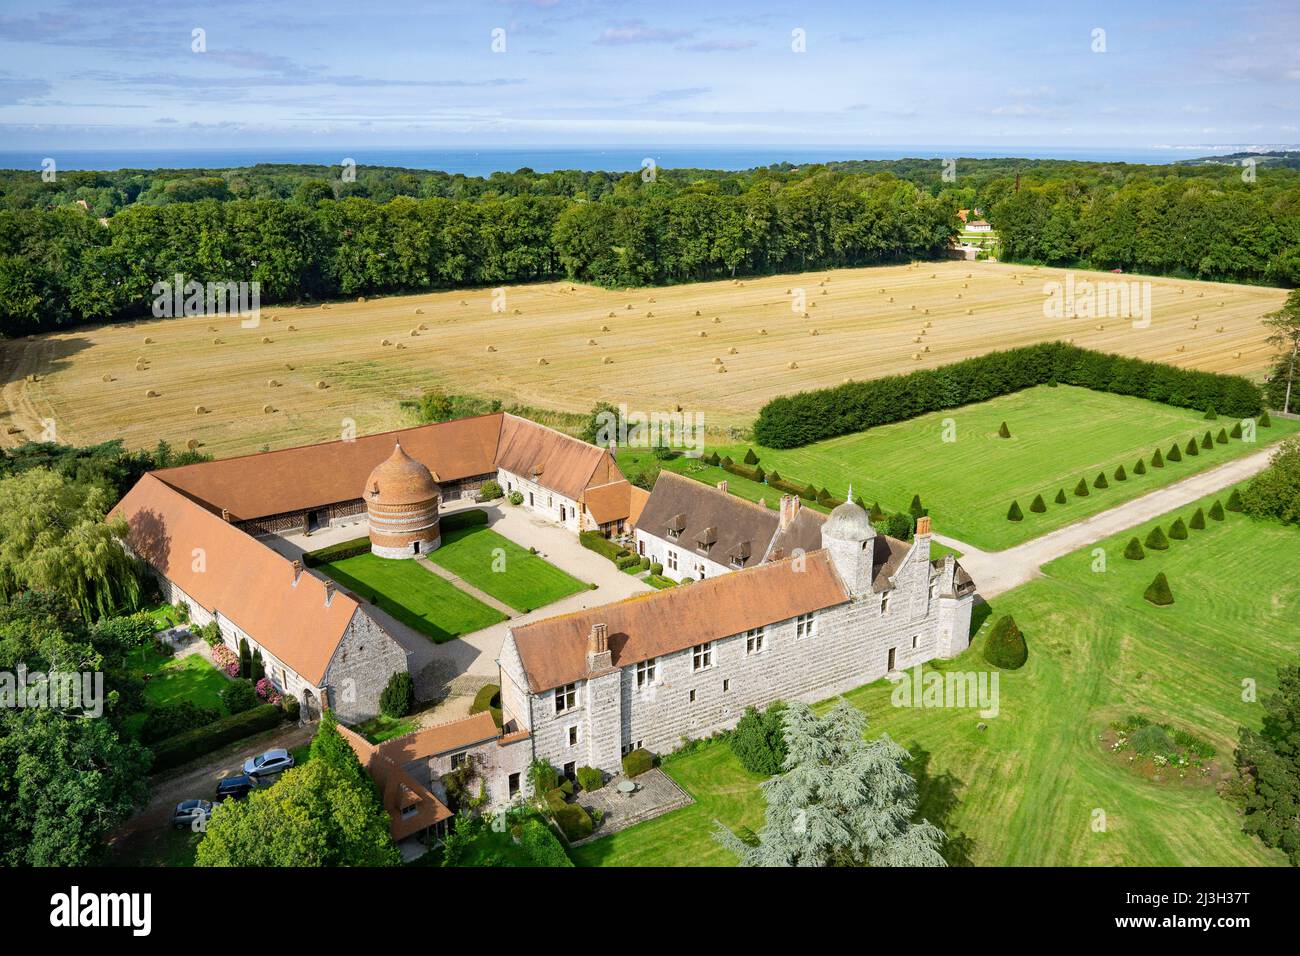 France, Seine Maritime, Varengeville sur Mer, manor of Ango, Renaissance residence, built by the shipowner Jean Ango (aerial view) Stock Photo